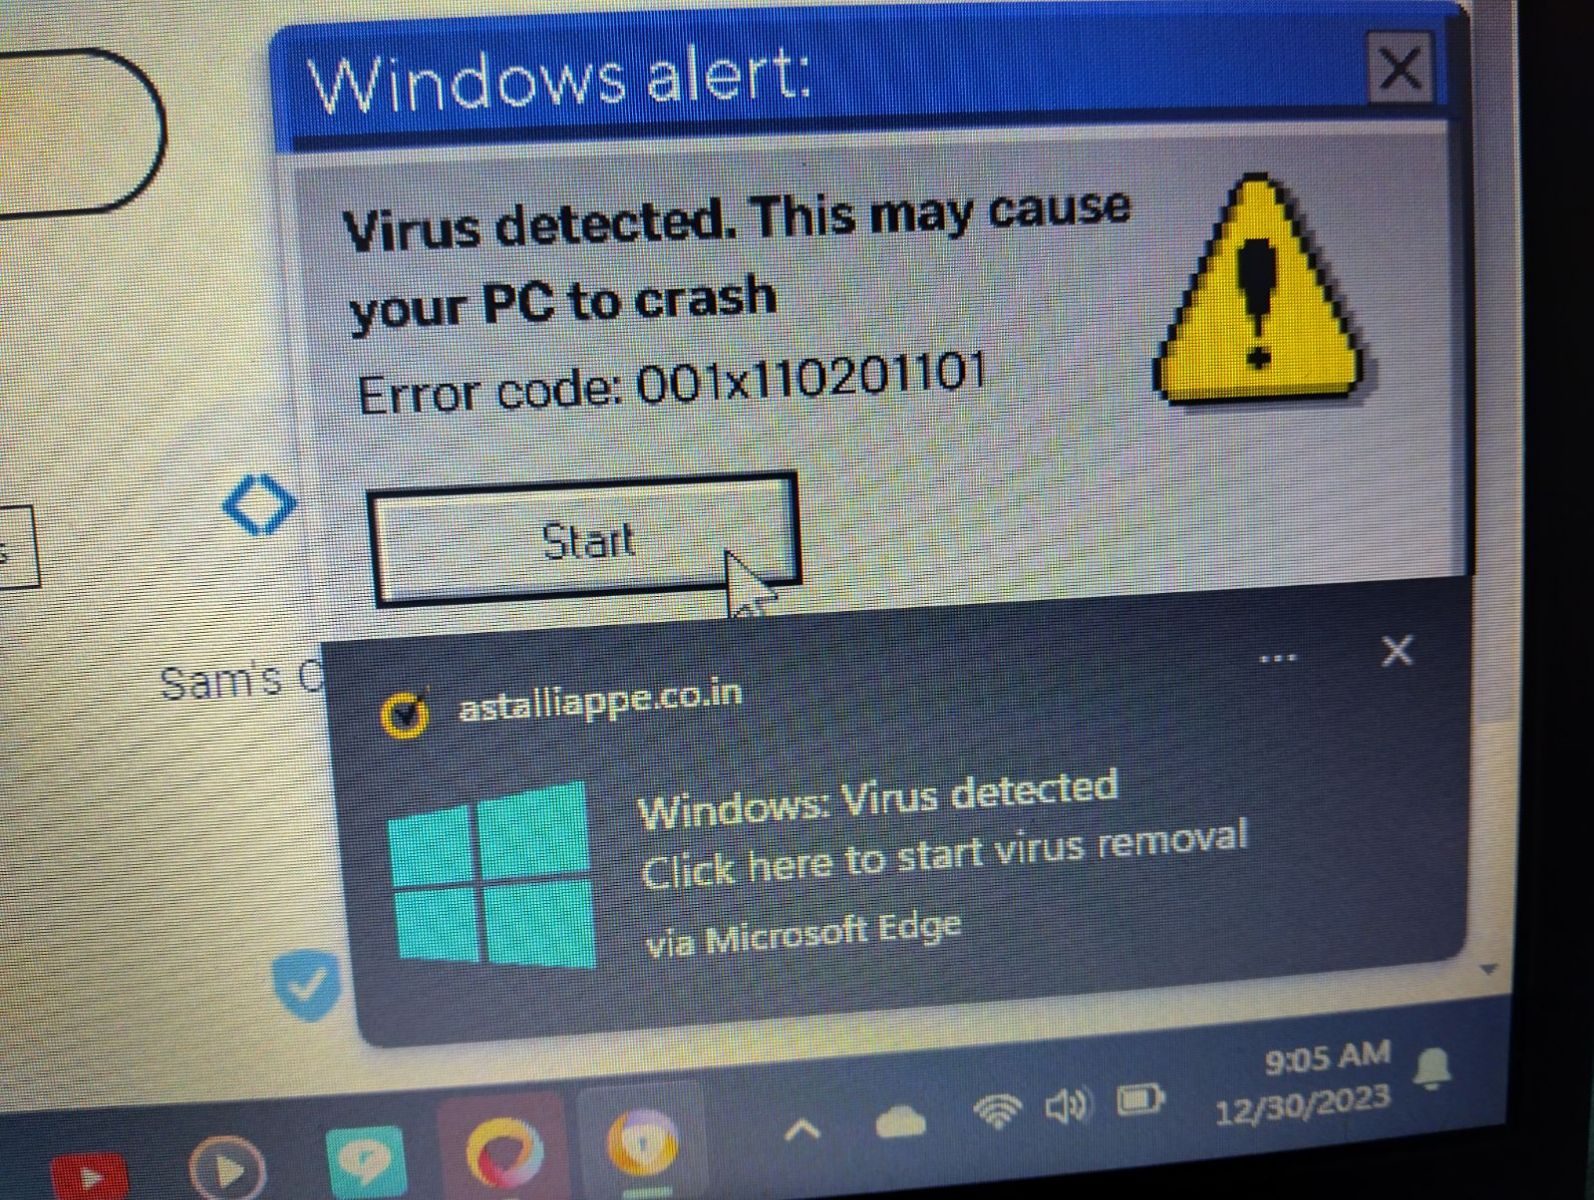 Fake anti-virus popup in browser. picture taken with mobile phone pointing at the computer screen